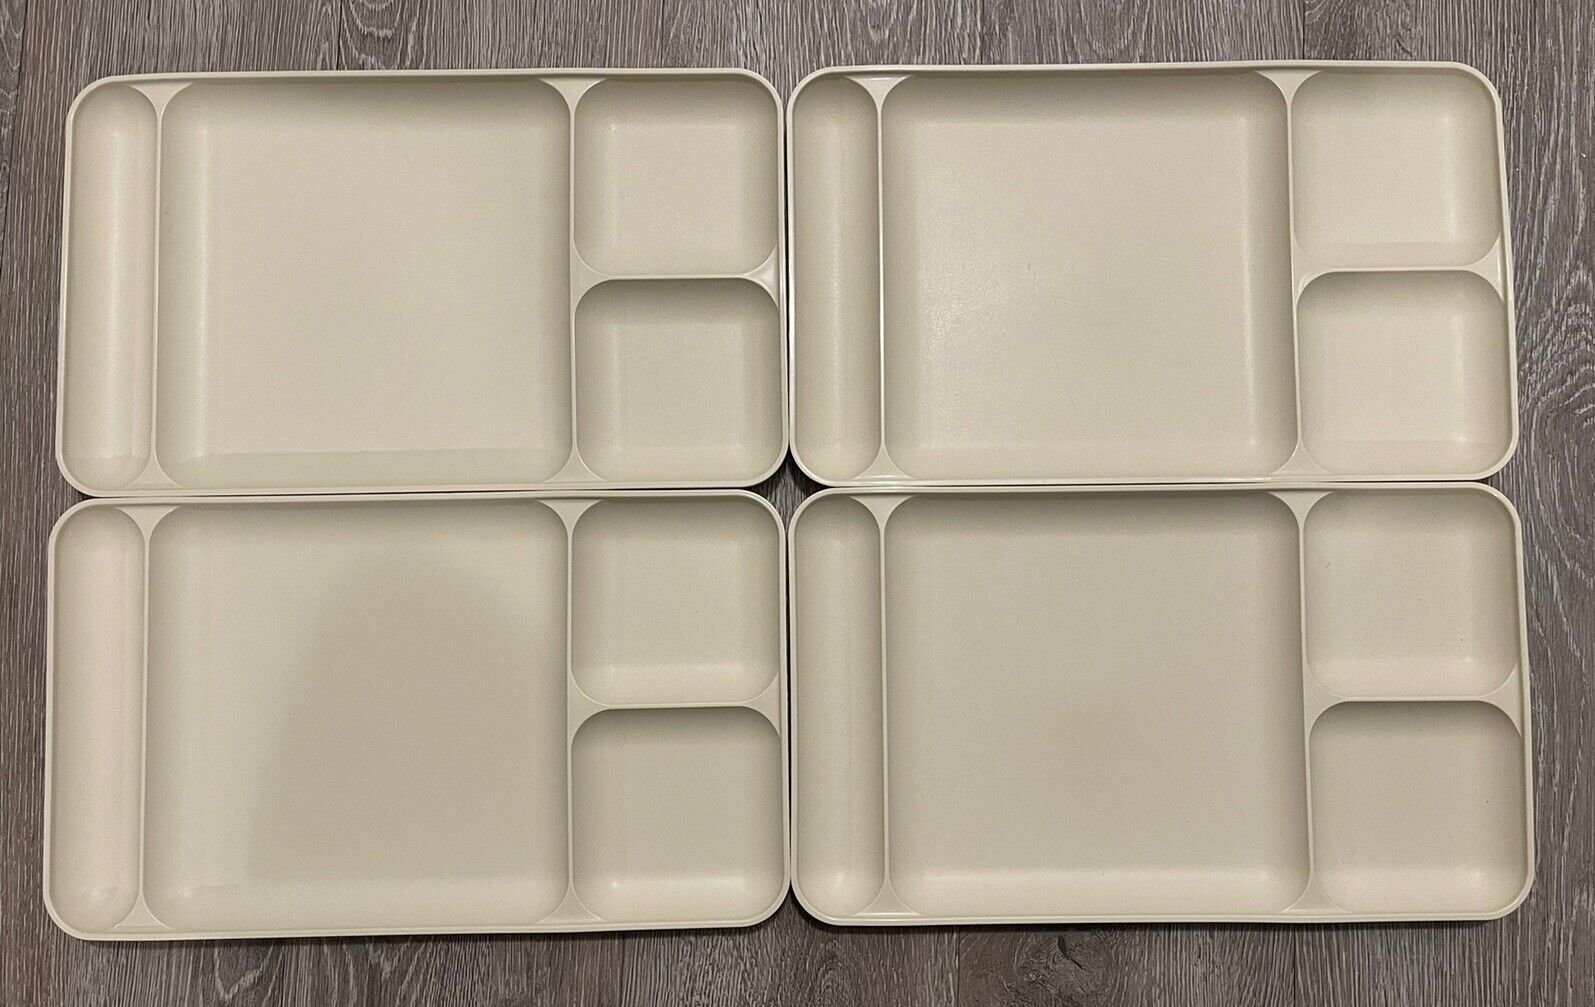 Vintage Stackable Tupperware Divided Food Lunch Trays Set of 4, Beige 1535-5